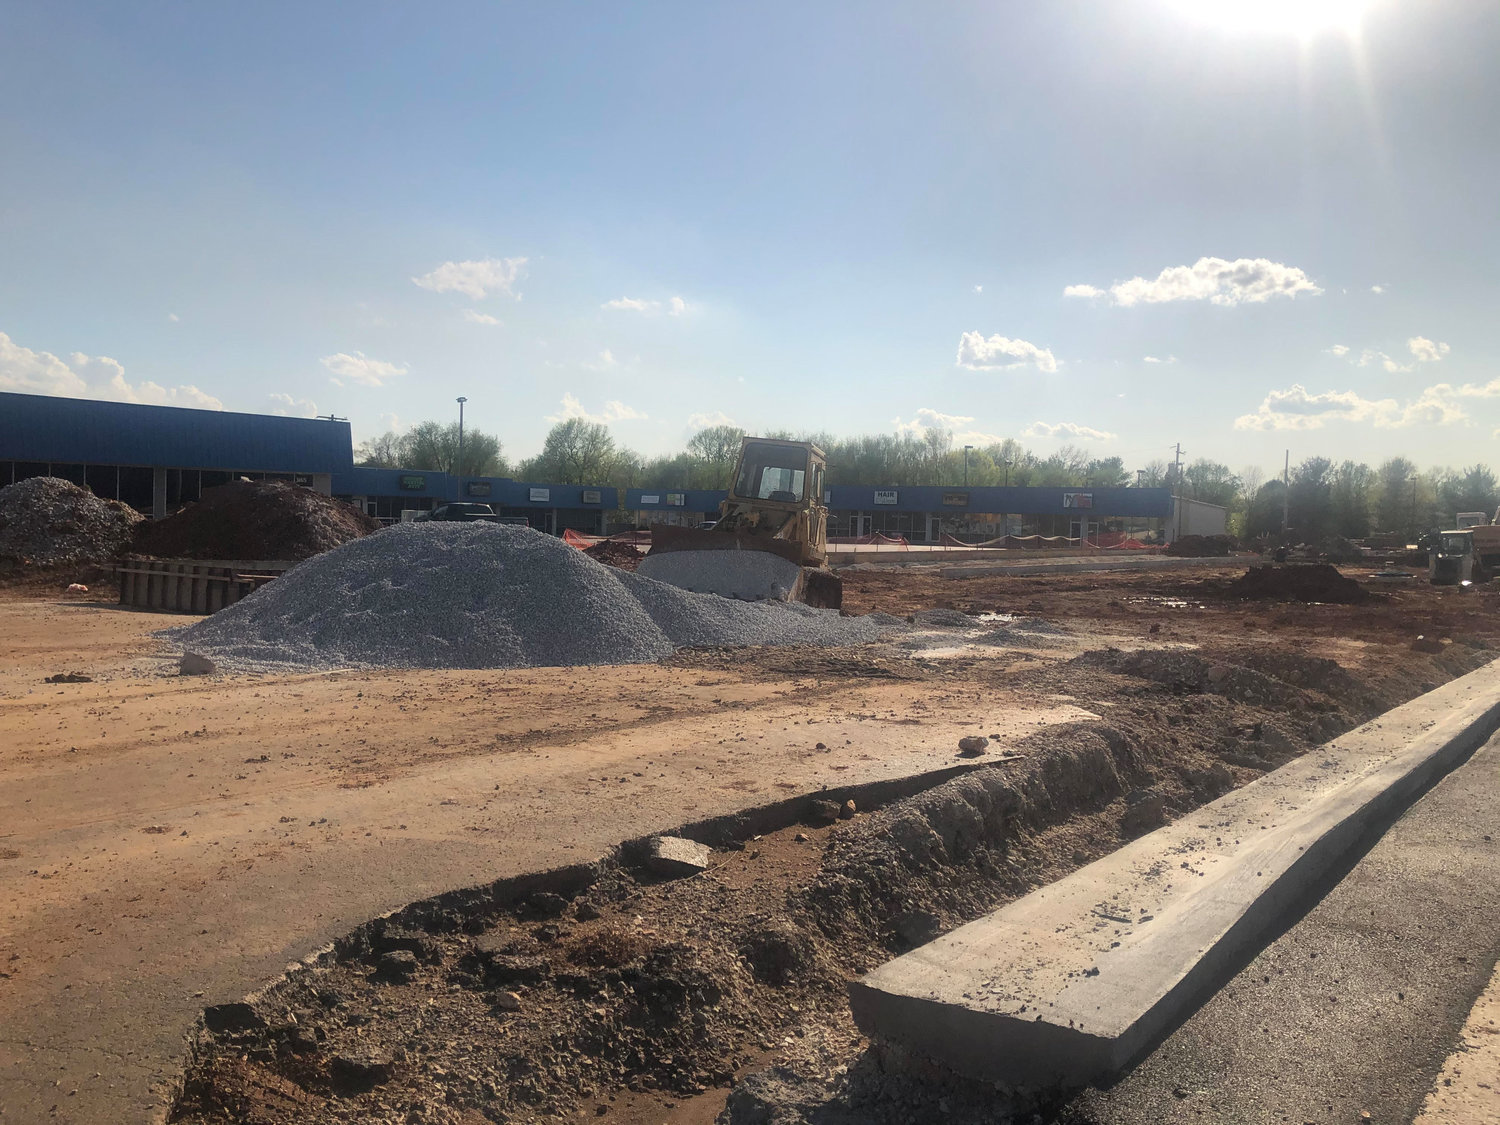 Blue Iguana Car Wash is planning a summer opening for a location at 3155 S. Campbell Ave. The project is shown under construction last week.